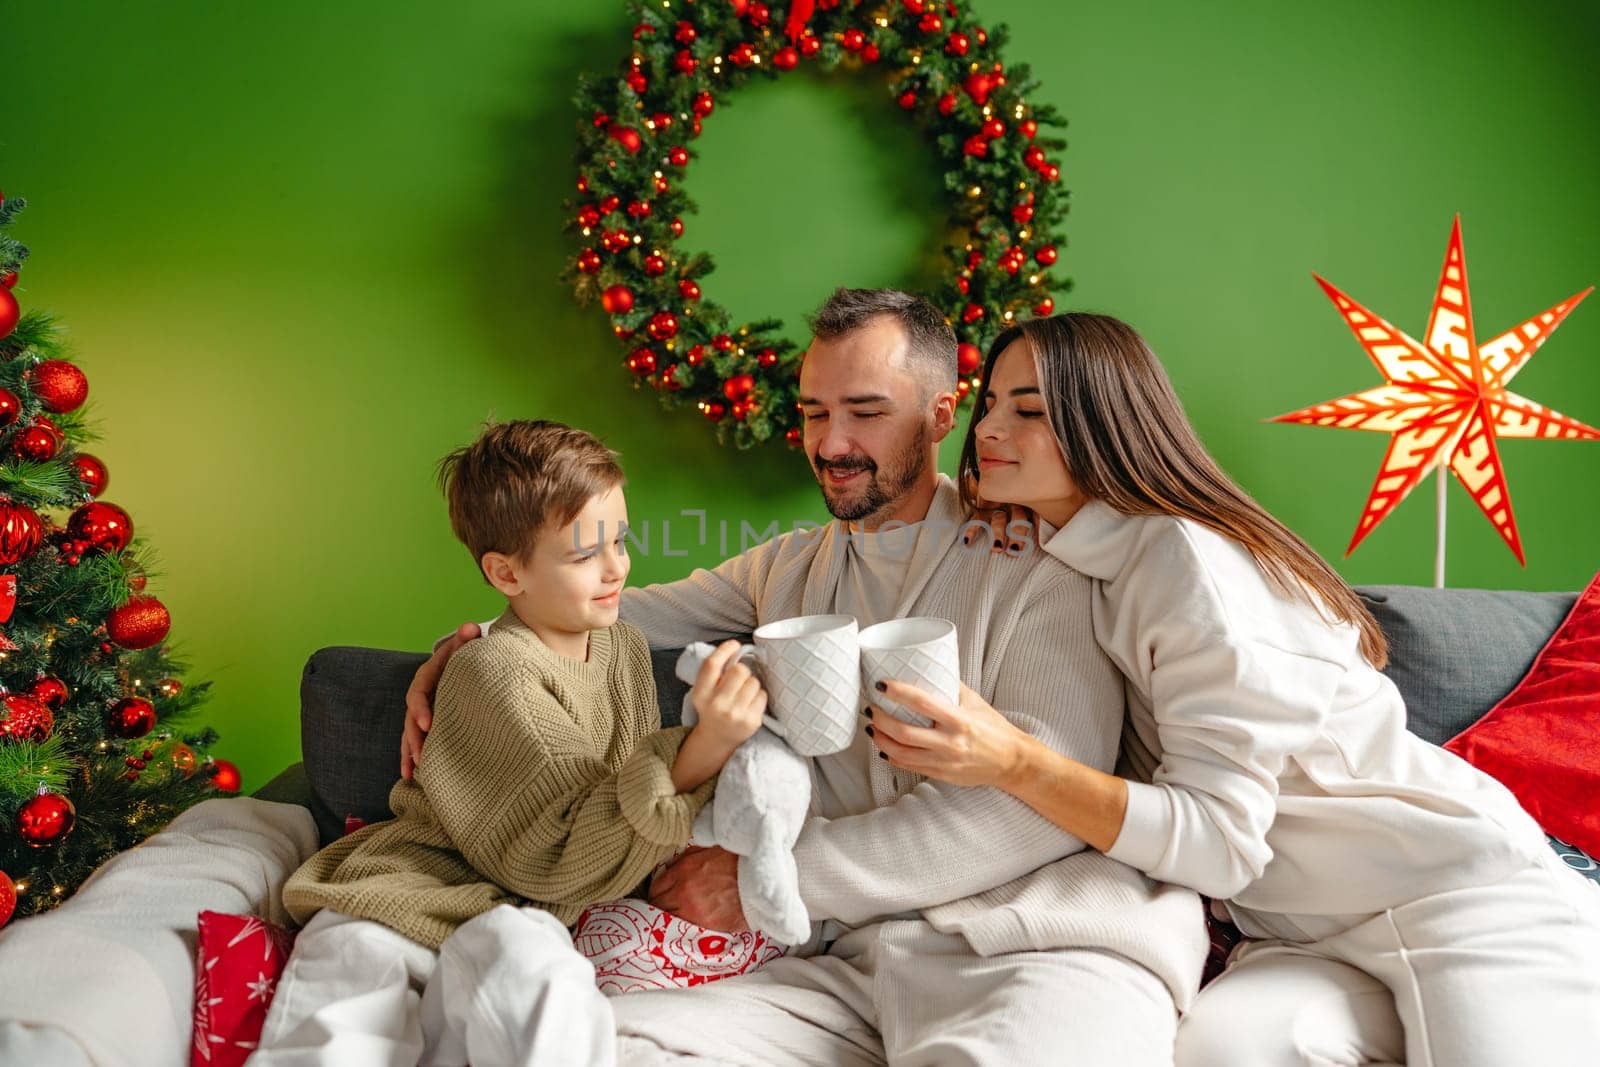 Happy young family sitting on sofa and relaxing at home at Christmas time